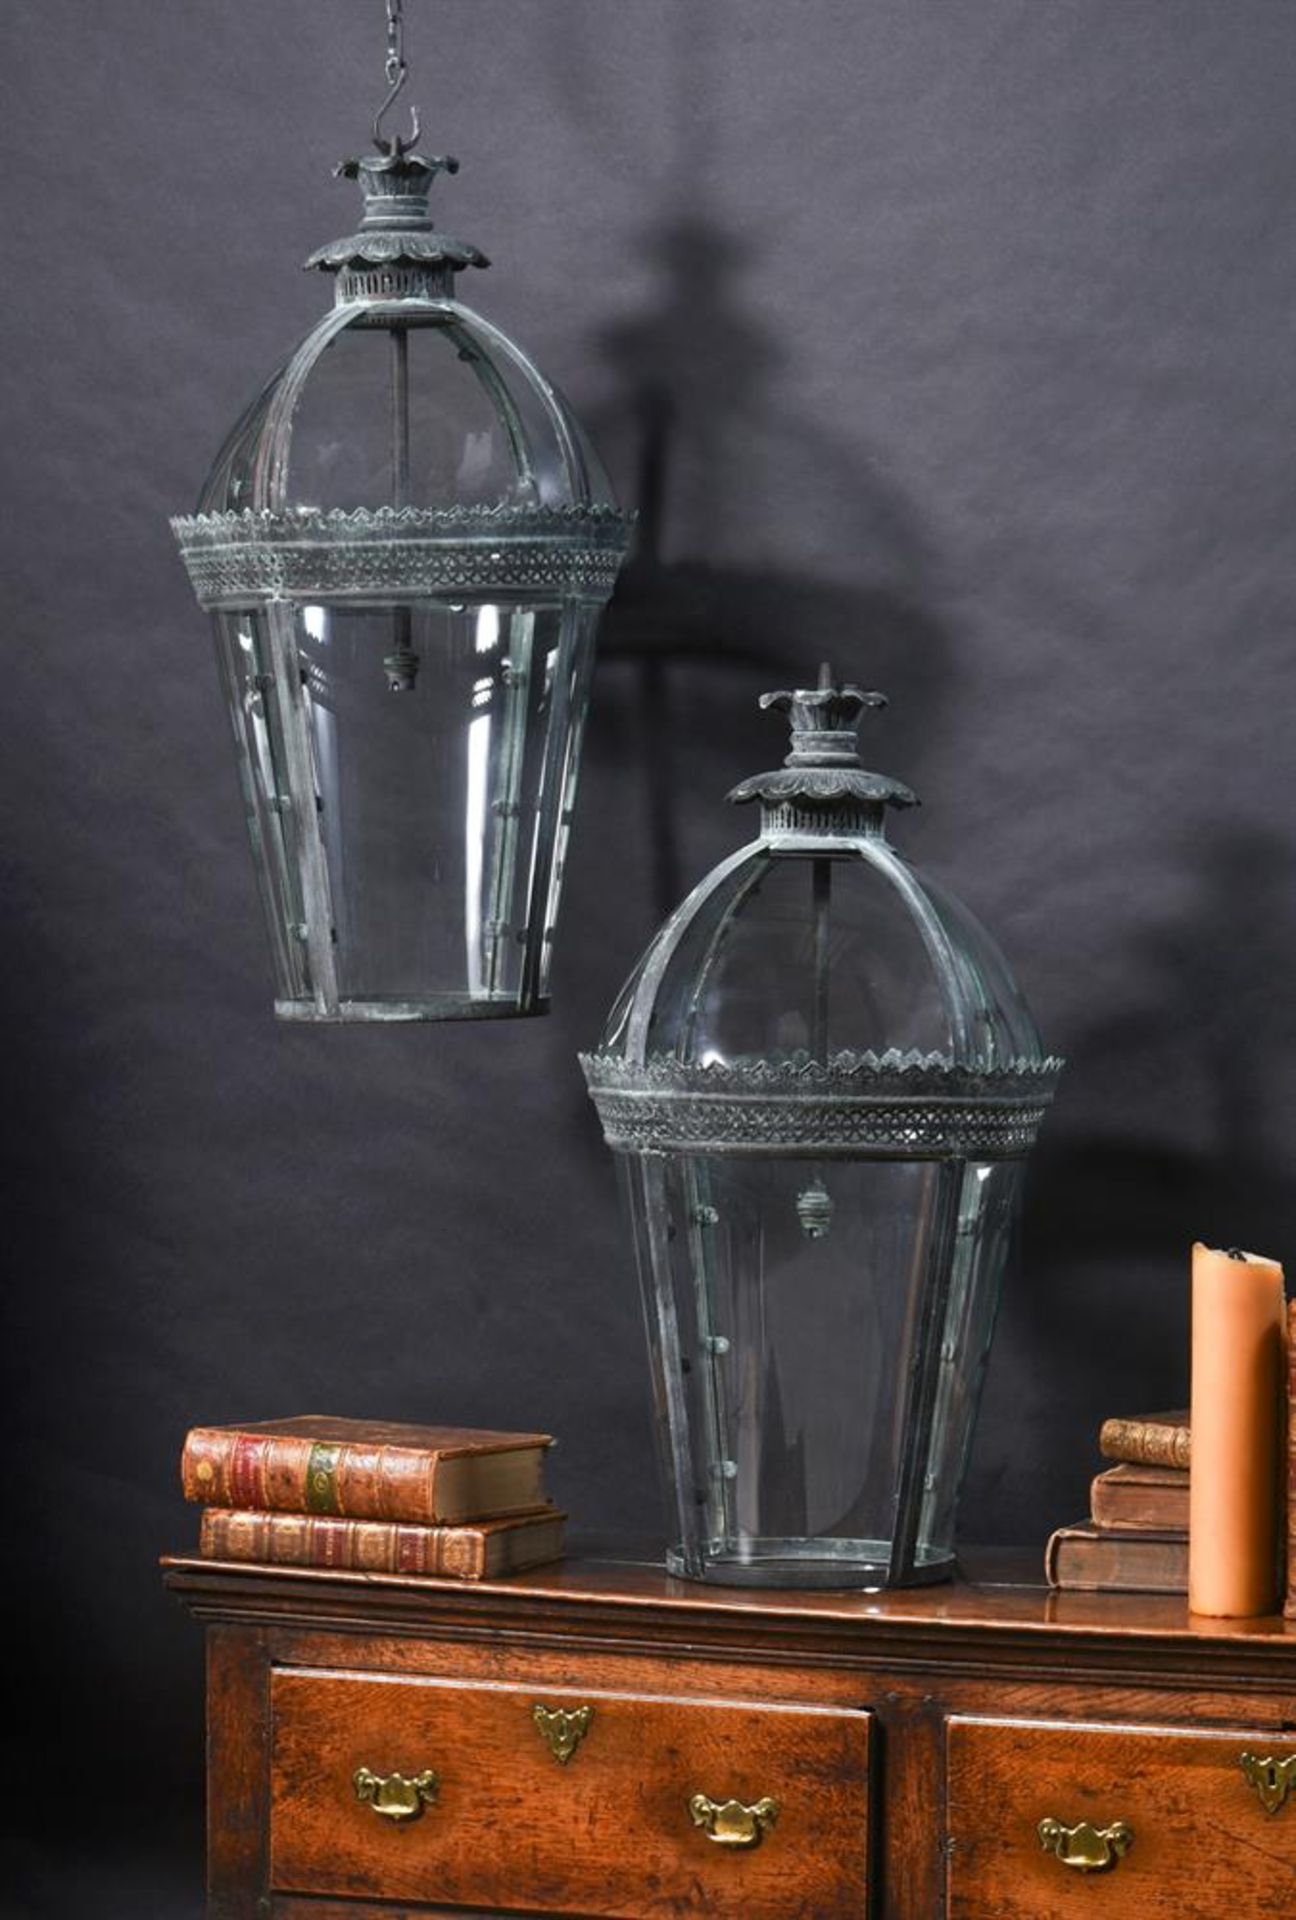 A PAIR OF COPPERED VERDIGRIS METAL AND GLASS LANTERNS OF RECENT MANUFACTURE